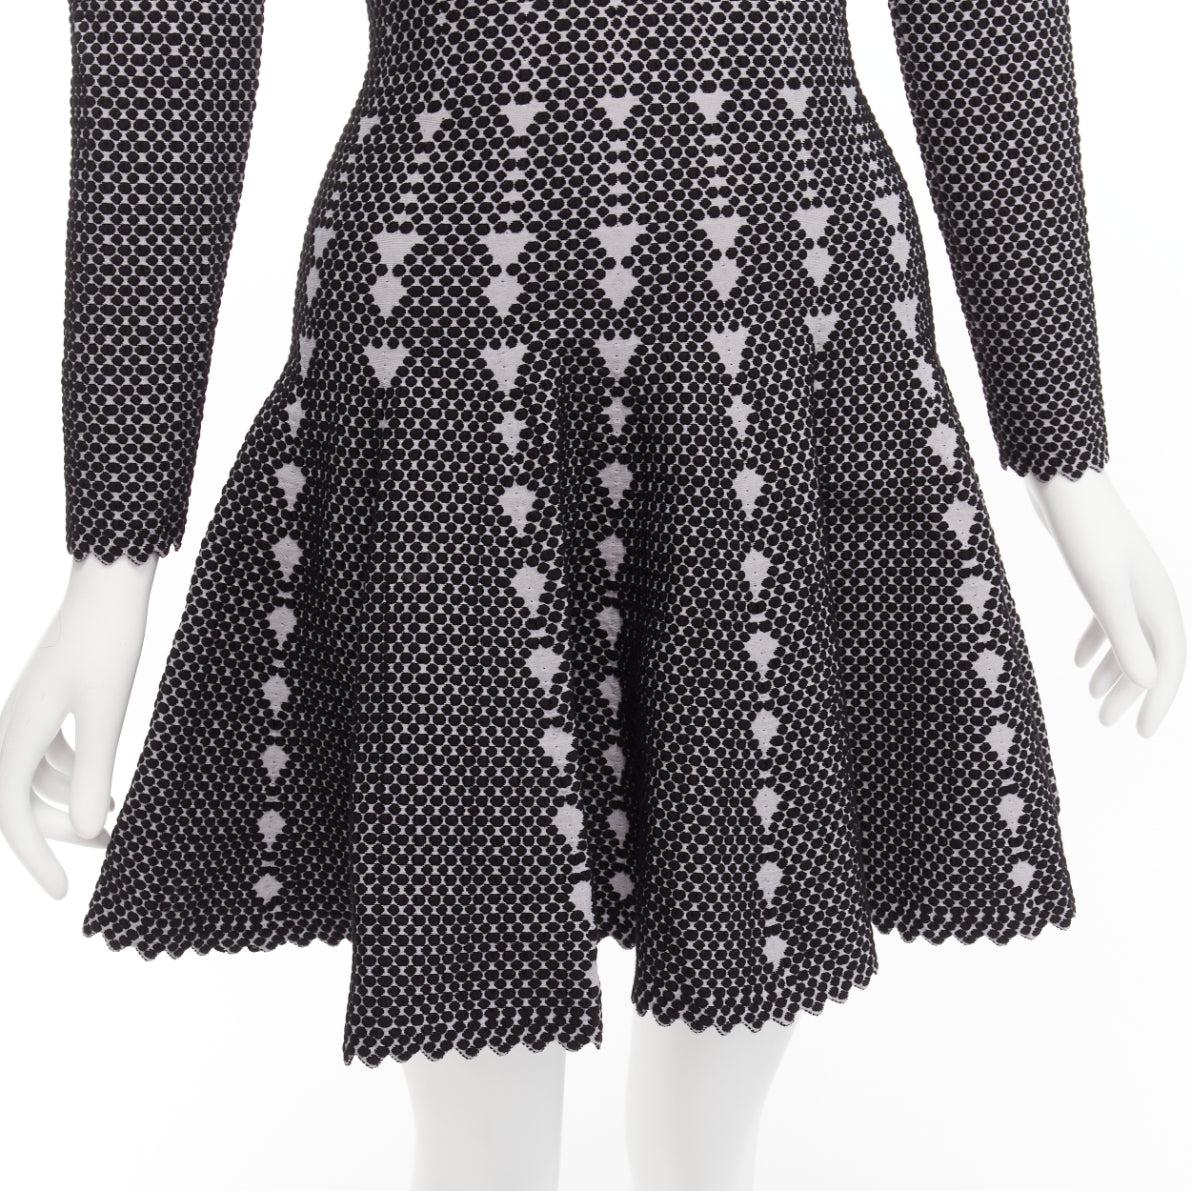 ALAIA grey virgin wool blend black graphic jacquard bateau fit flare dress FR36 S
Reference: AAWC/A01083
Brand: Alaia
Material: Virgin Wool, Blend
Color: Grey, Black
Pattern: Polka Dot
Closure: Zip
Extra Details: Back zip.
Made in: